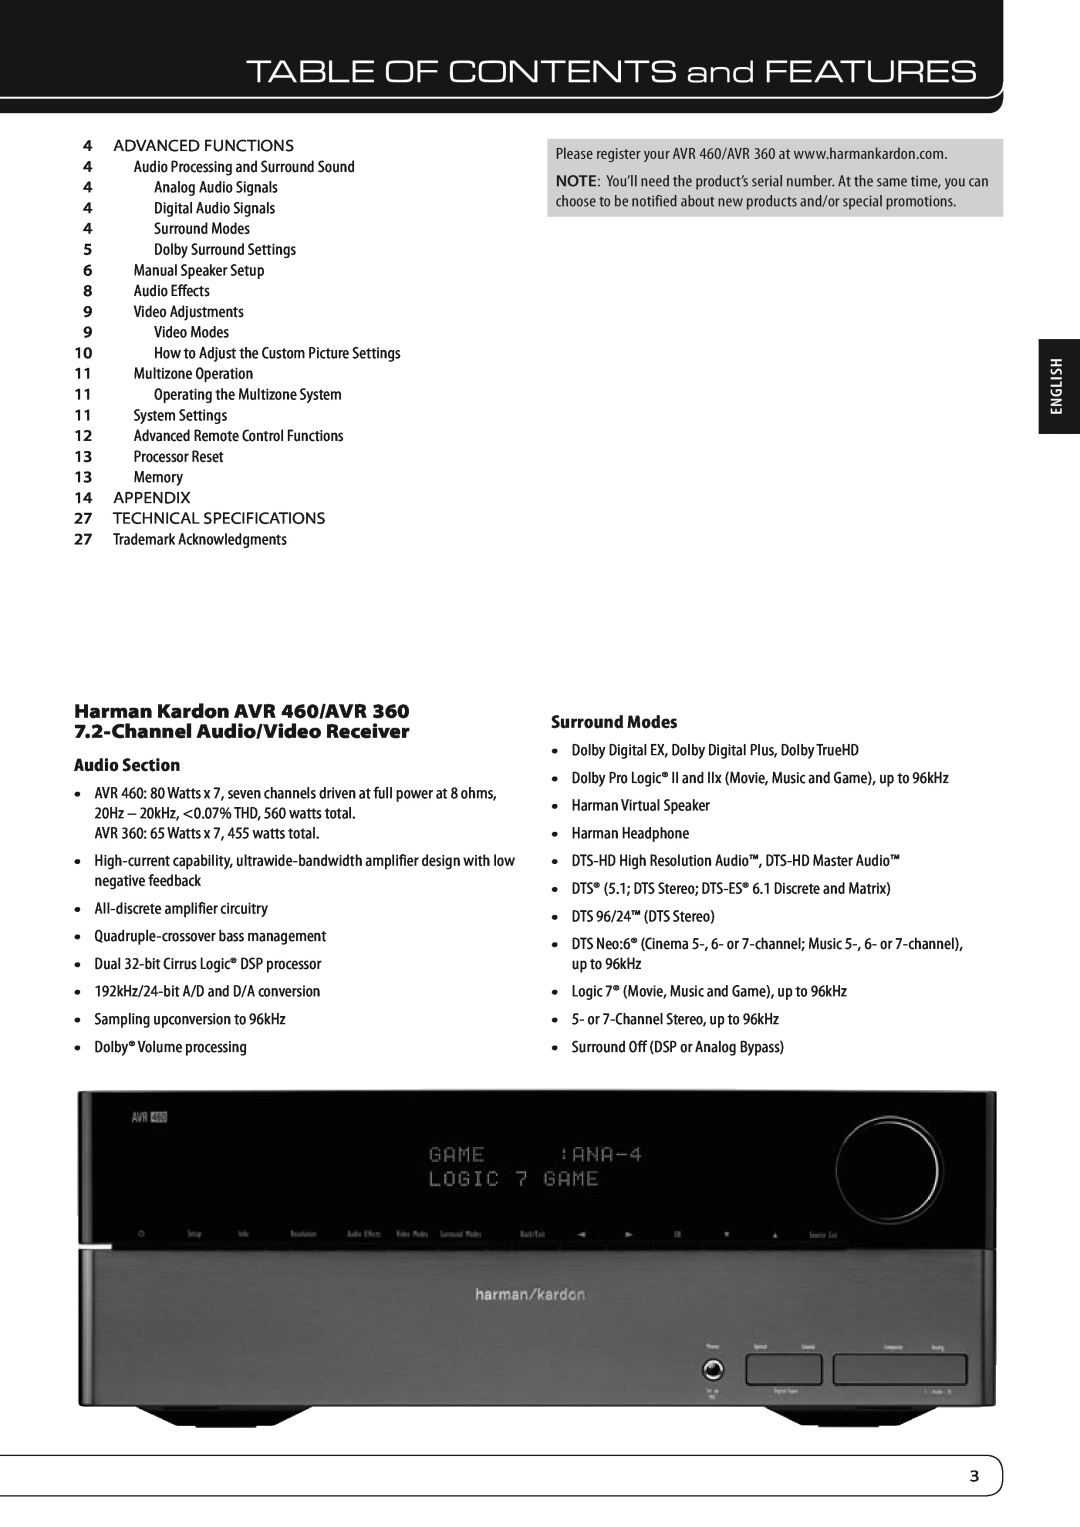 Harman-Kardon AVR 360, AVR 460 manual TABLE OF CONTENTS and Features, English 